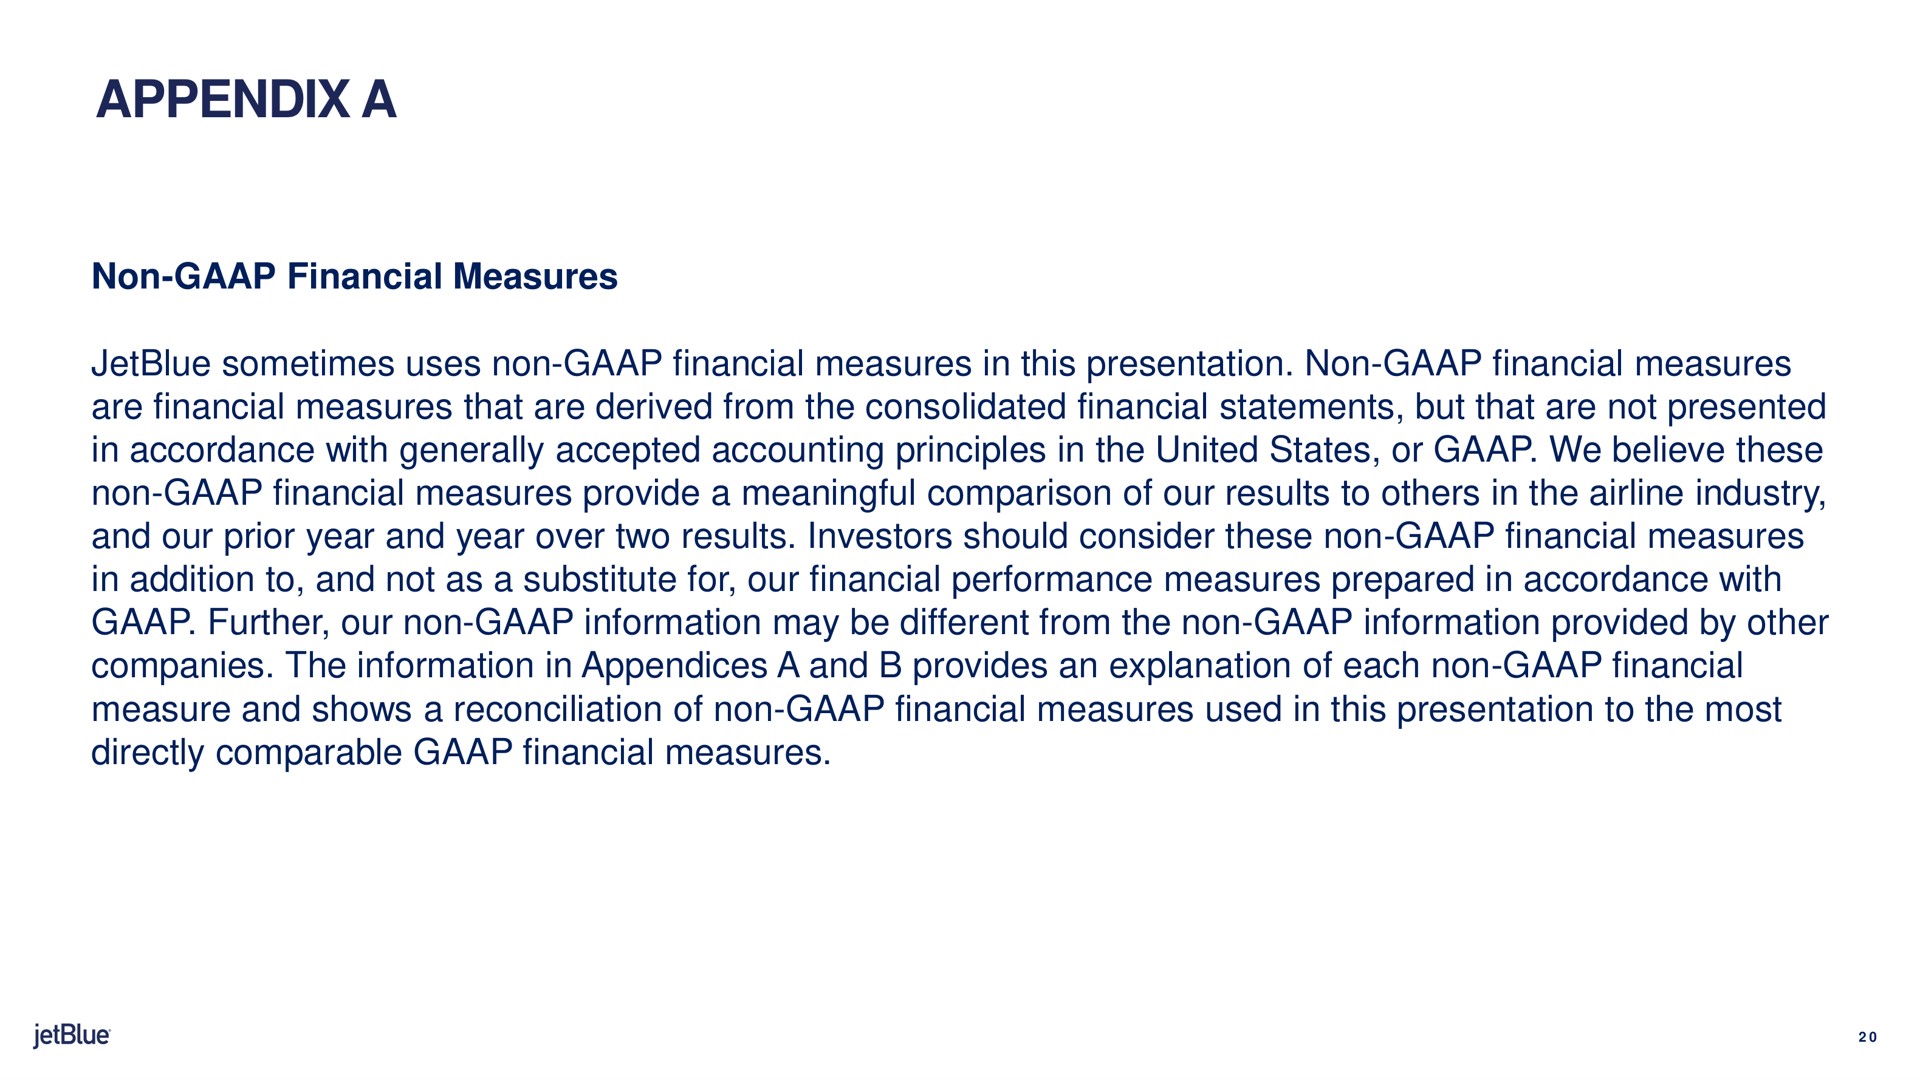 appendix a non financial measures sometimes uses non financial measures in this presentation non financial measures are financial measures that are derived from the consolidated financial statements but that are not presented in accordance with generally accepted accounting principles in the united states or we believe these non financial measures provide a meaningful comparison of our results to in the industry and our prior year and year over two results investors should consider these non financial measures in addition to and not as a substitute for our financial performance measures prepared in accordance with further our non information may be different from the non information provided by other companies the information in appendices a and provides an explanation of each non financial measure and shows a reconciliation of non financial measures used in this presentation to the most directly comparable financial measures | jetBlue